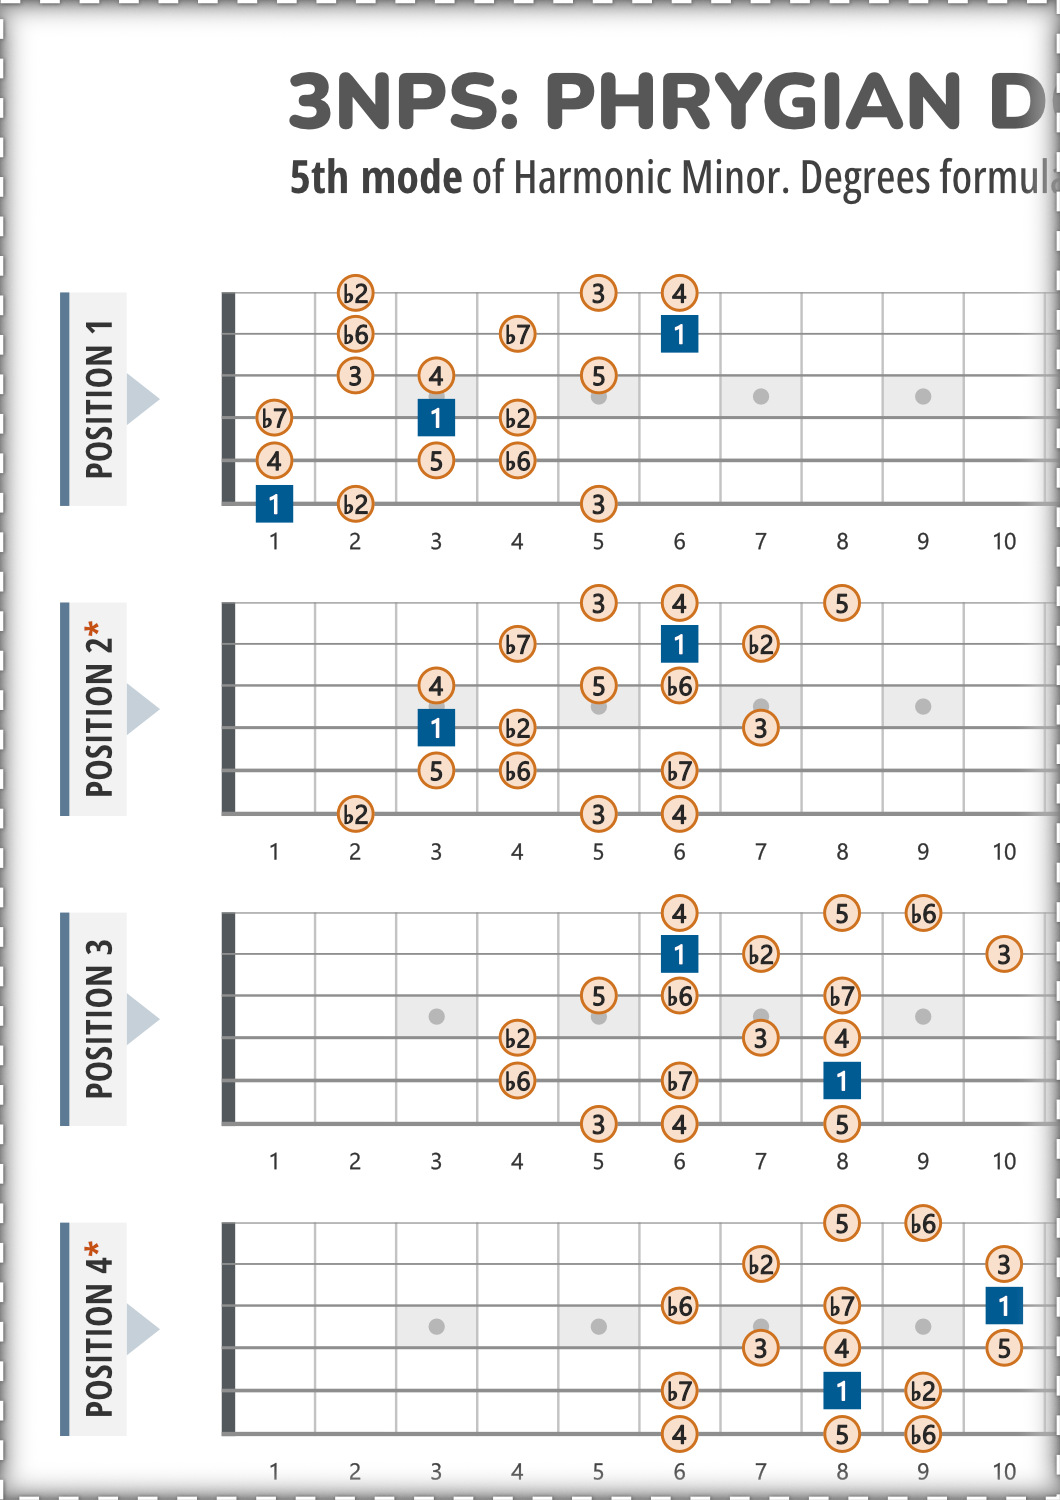 Phrygian Dominant 3NPS Guitar Patterns Chart With Intervals